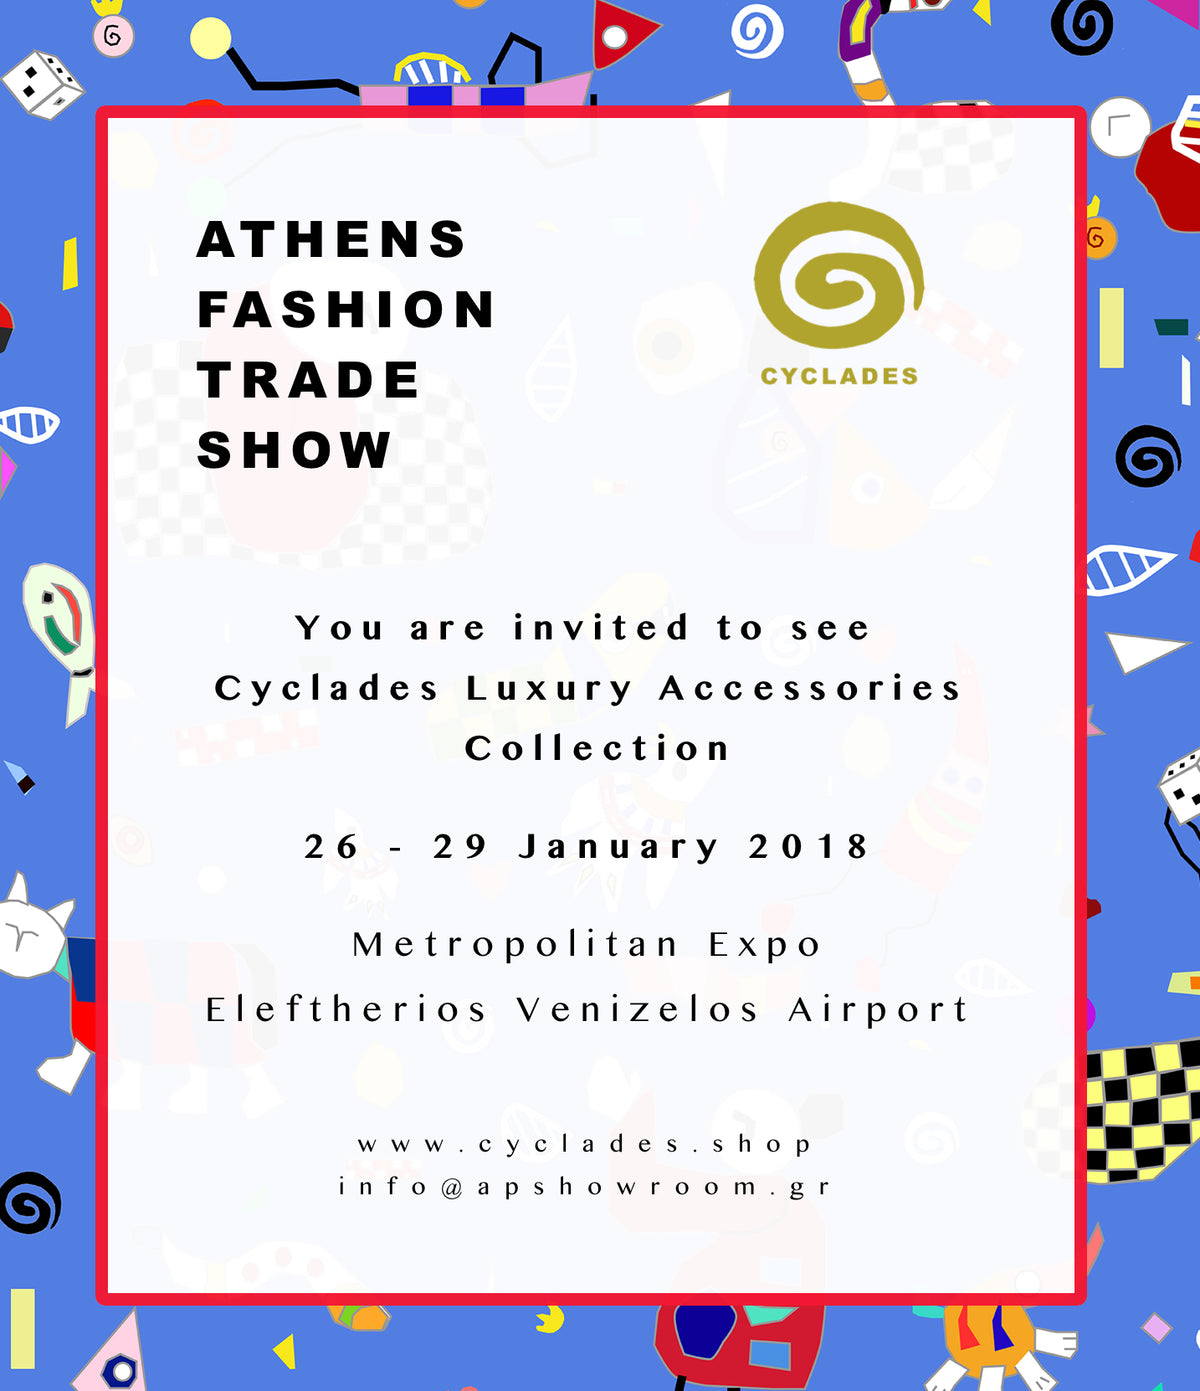 Come and meet Cyclades at Athens Fashion Trade Show